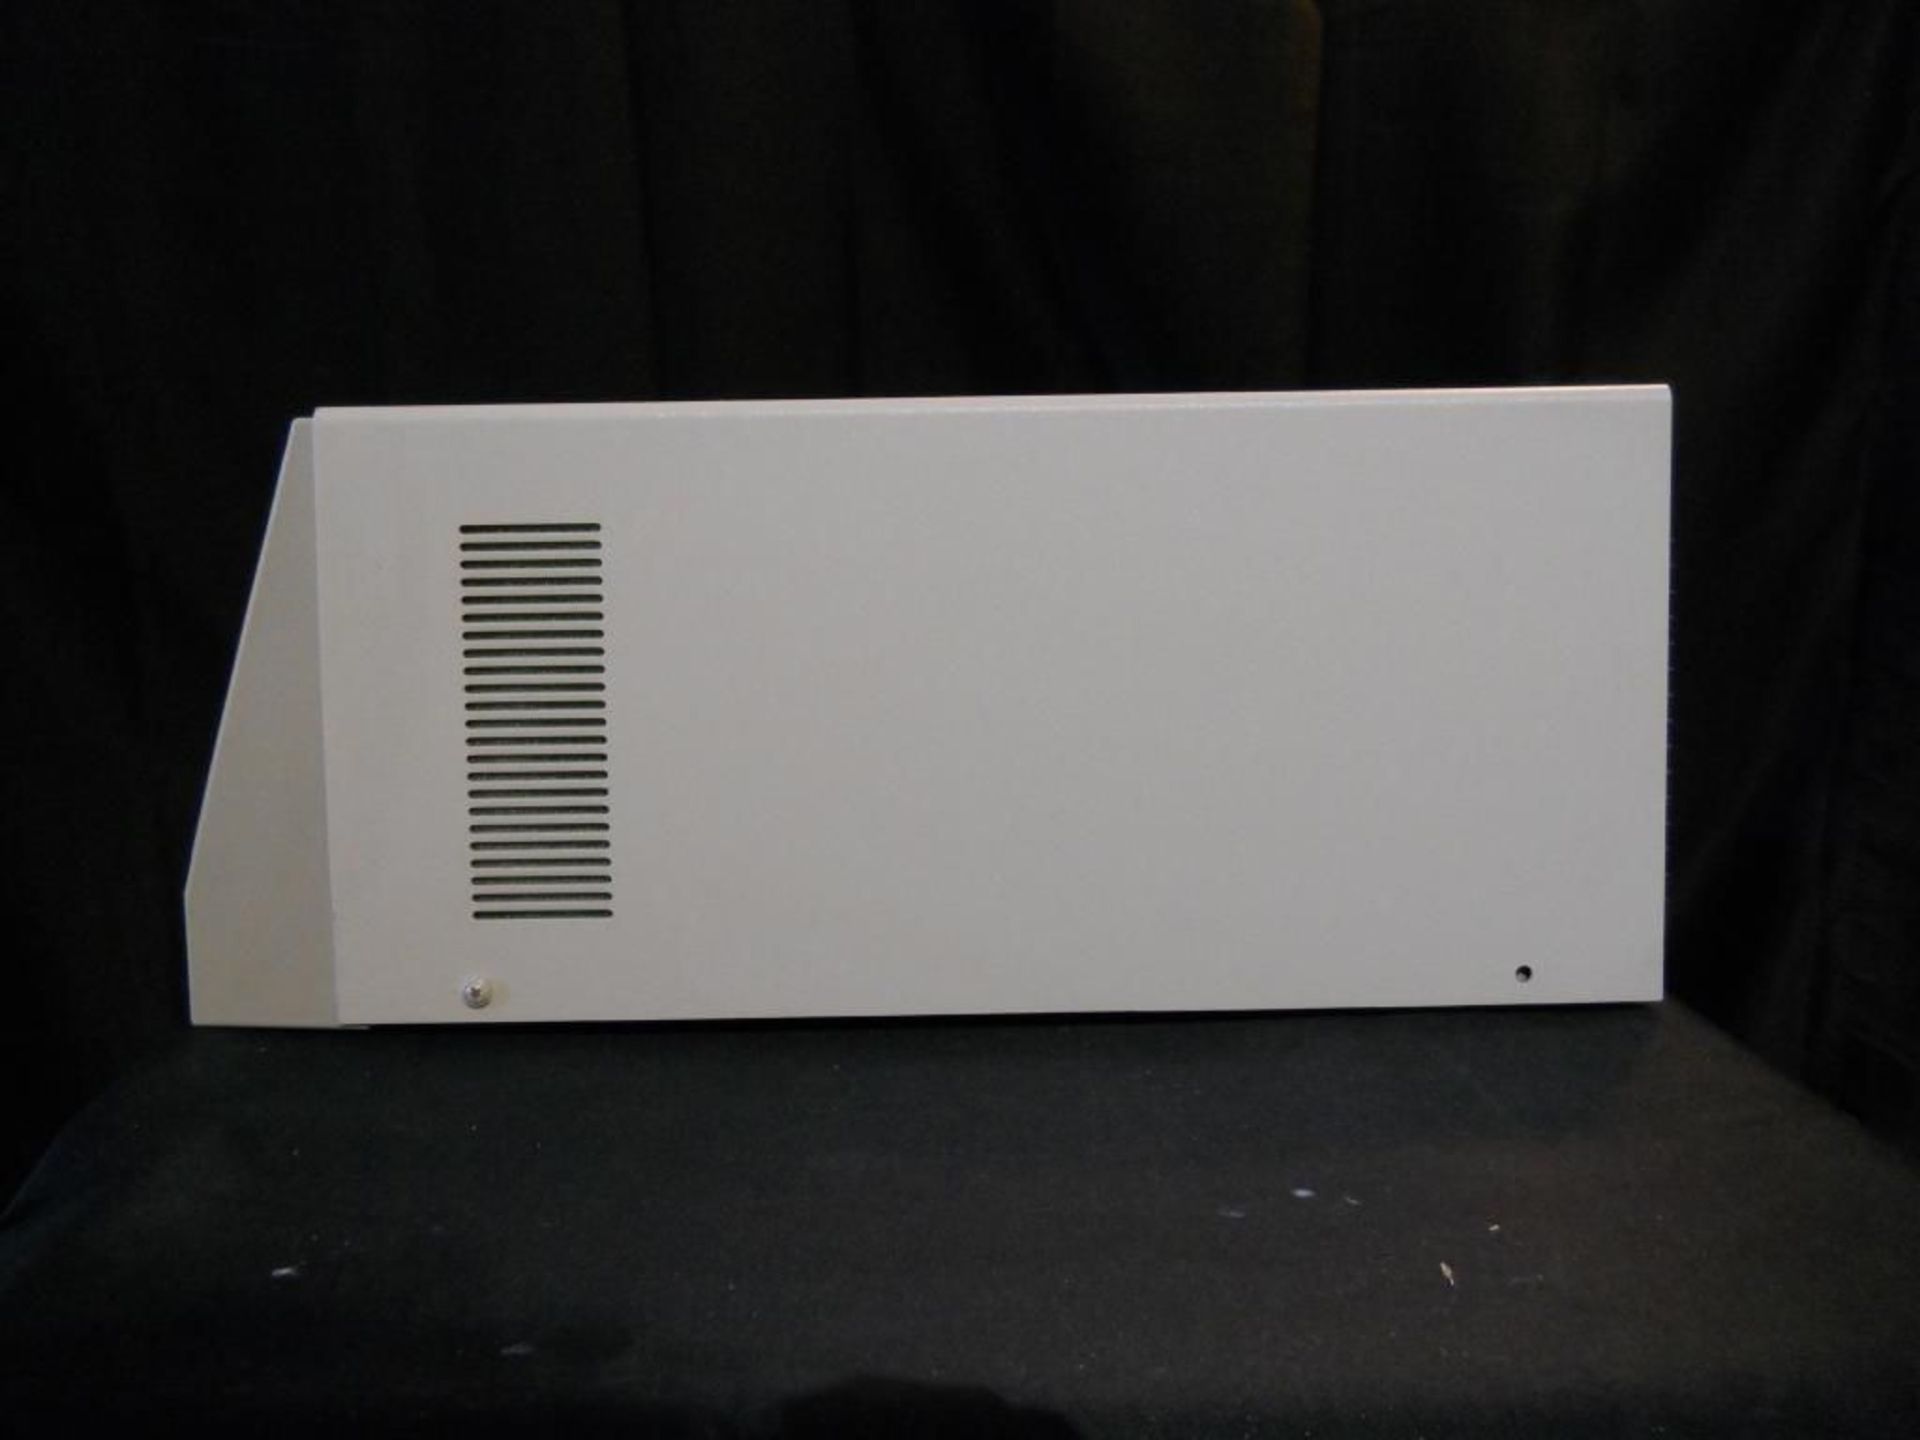 Waters 486 Turnable Absorbance Detector Model M486 HPLC, Qty 1, 221190010001 - Image 3 of 7